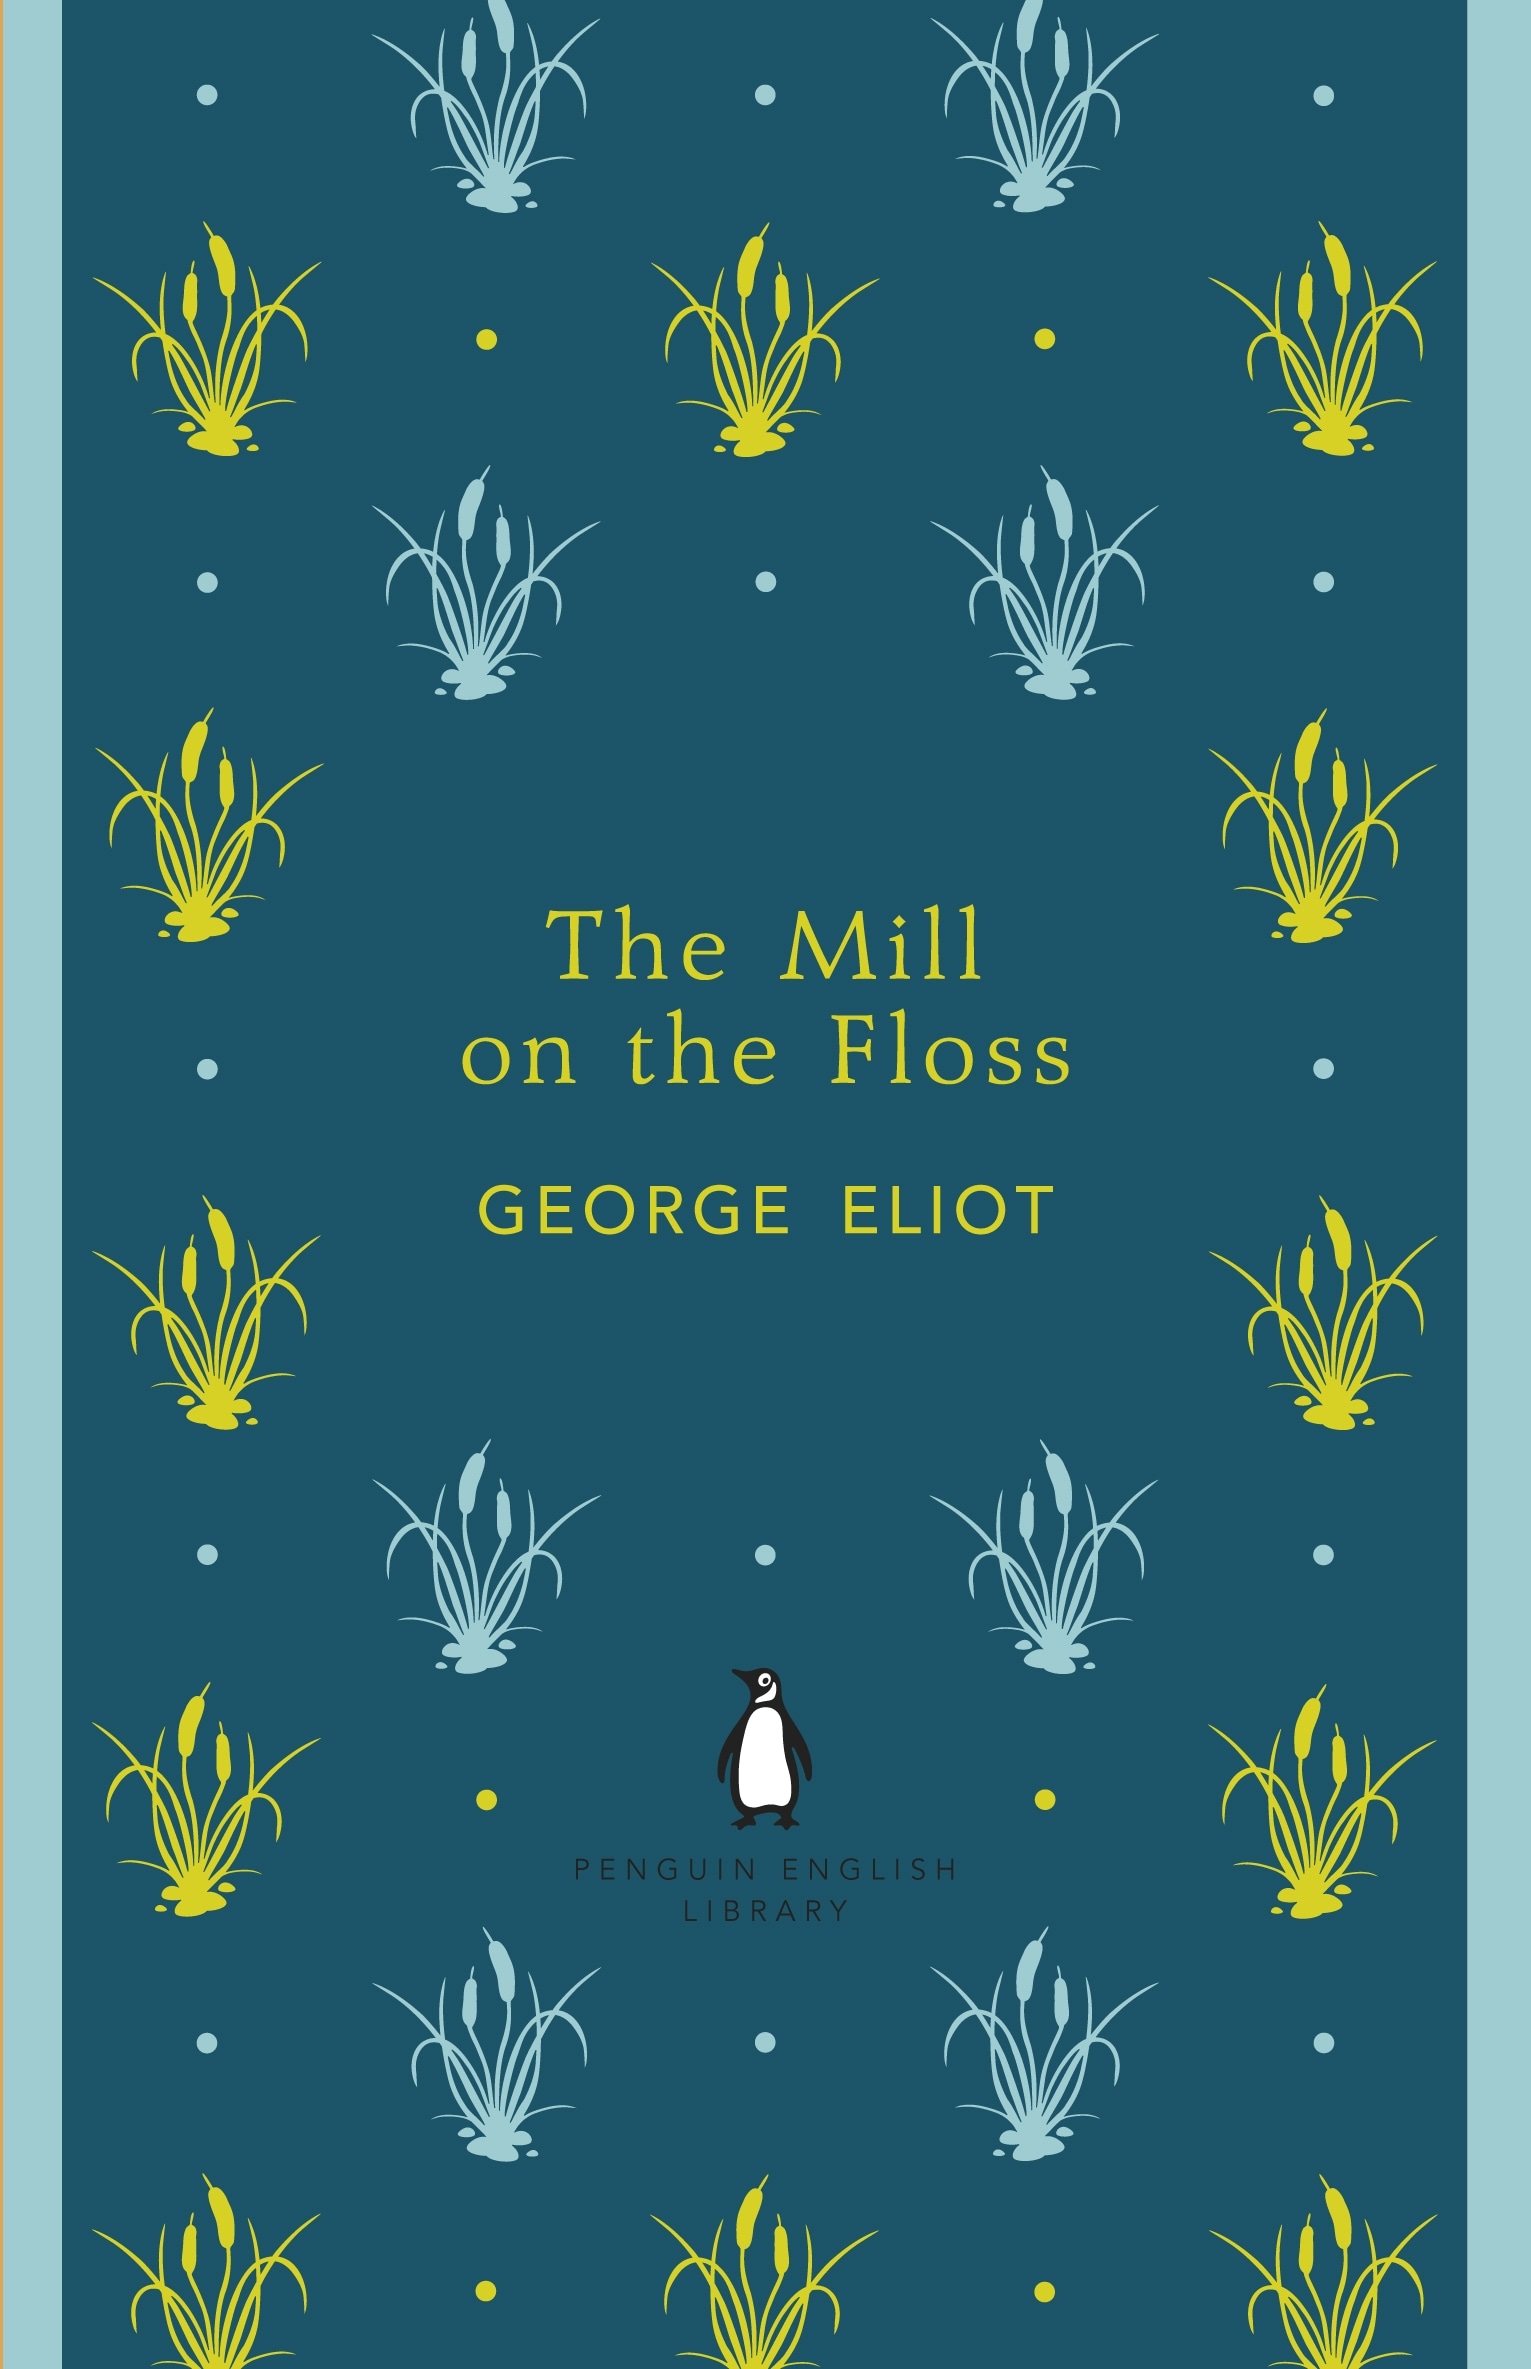 Book “The Mill on the Floss” by George Eliot — April 26, 2012